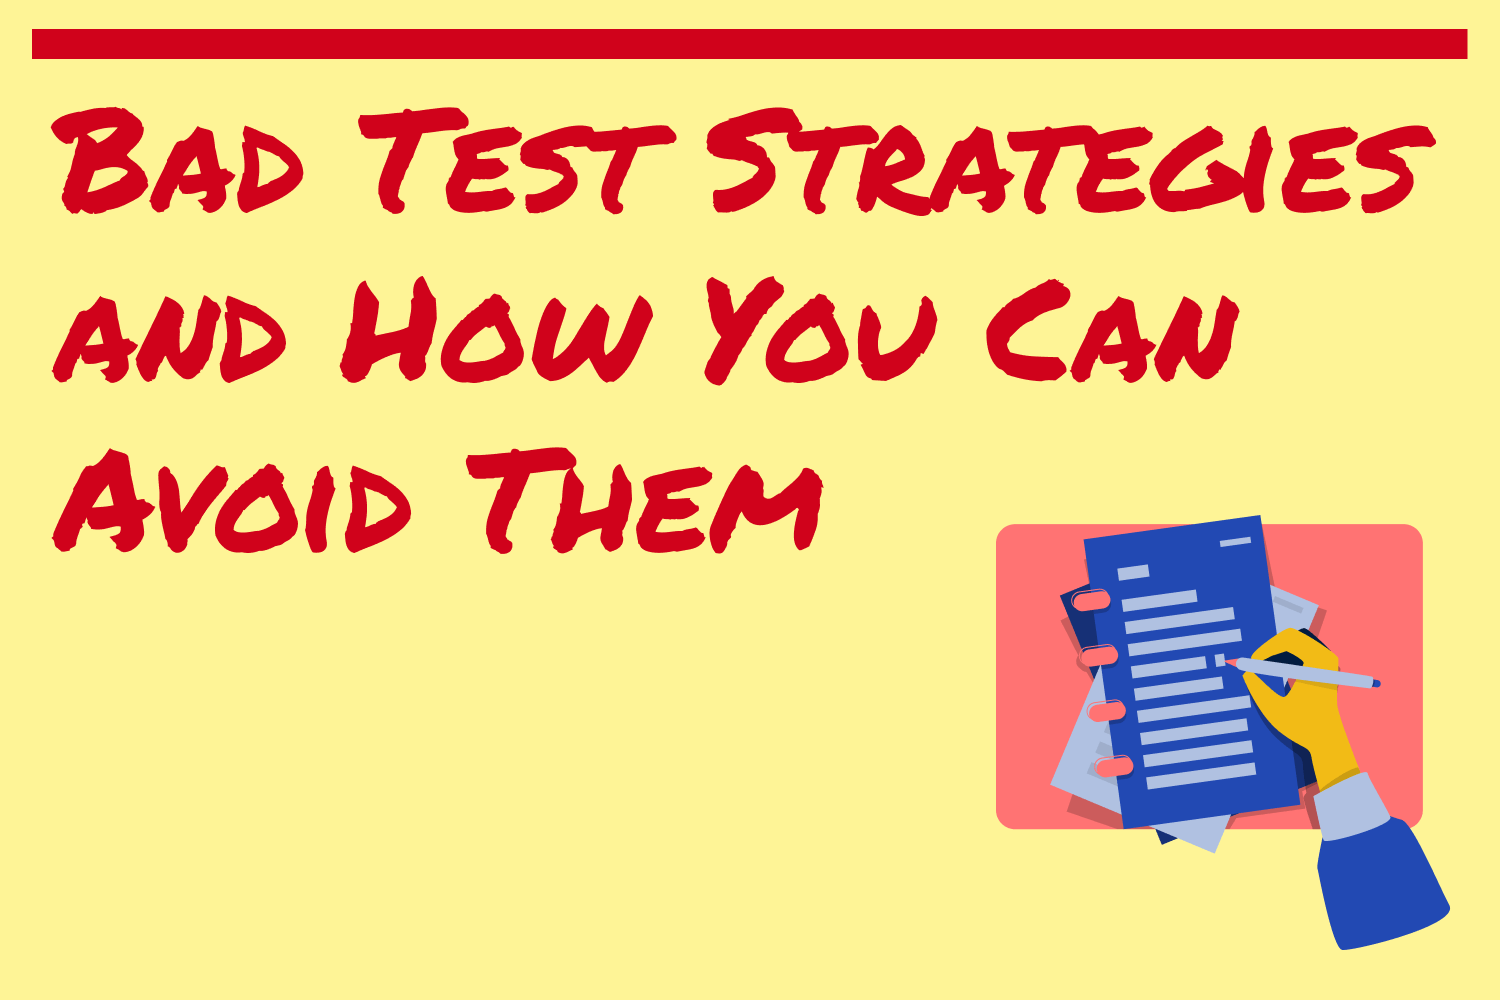 Bad Test Strategies and How You Can Avoid Them